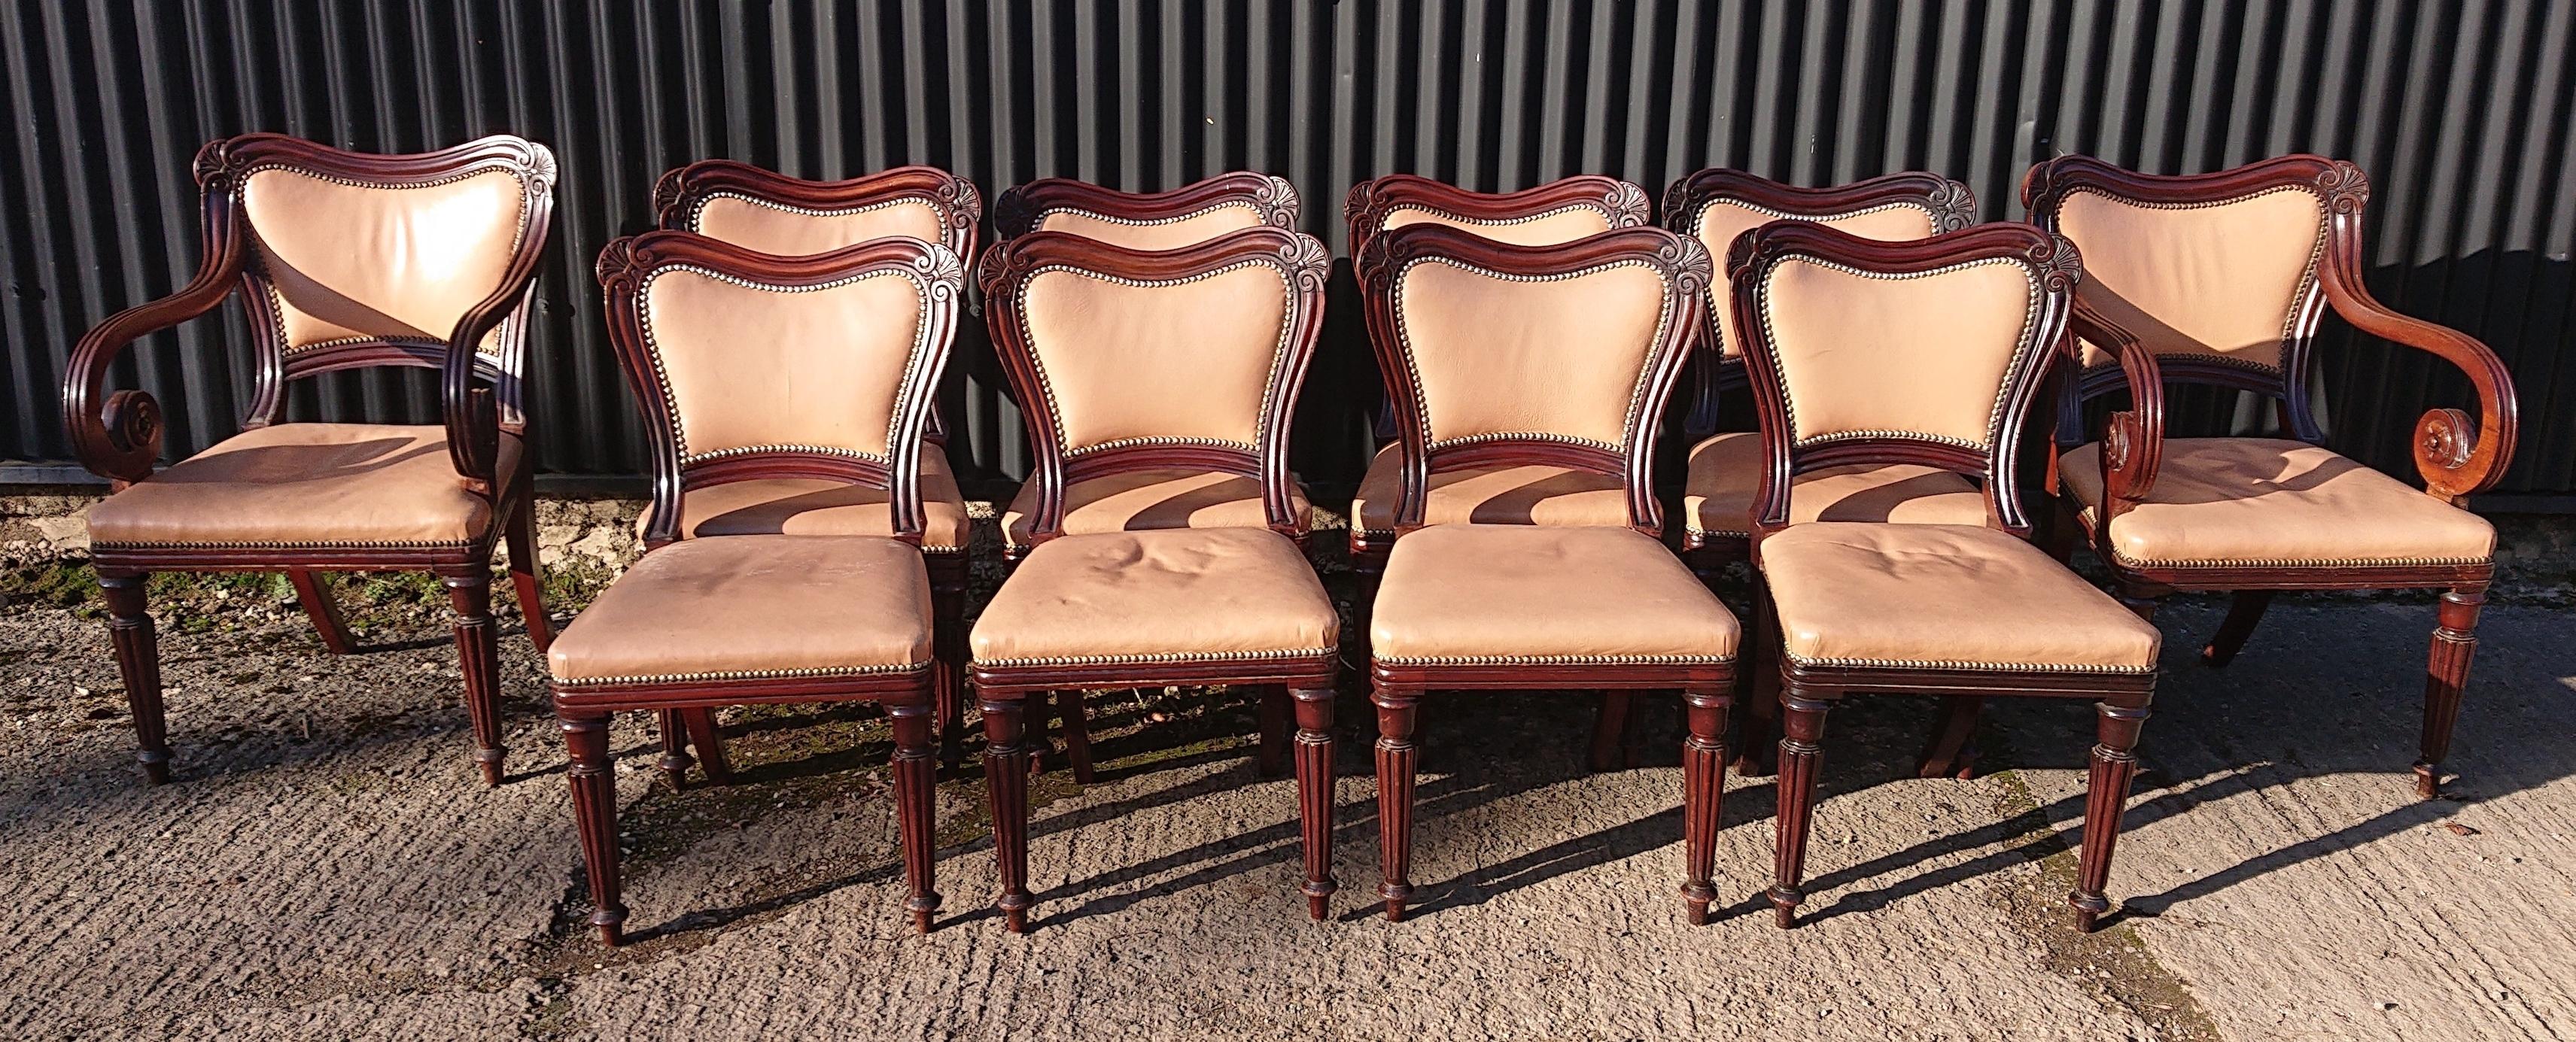 Regency Set of Ten Antique Dining Chairs by Gillow of Lancaster and London For Sale